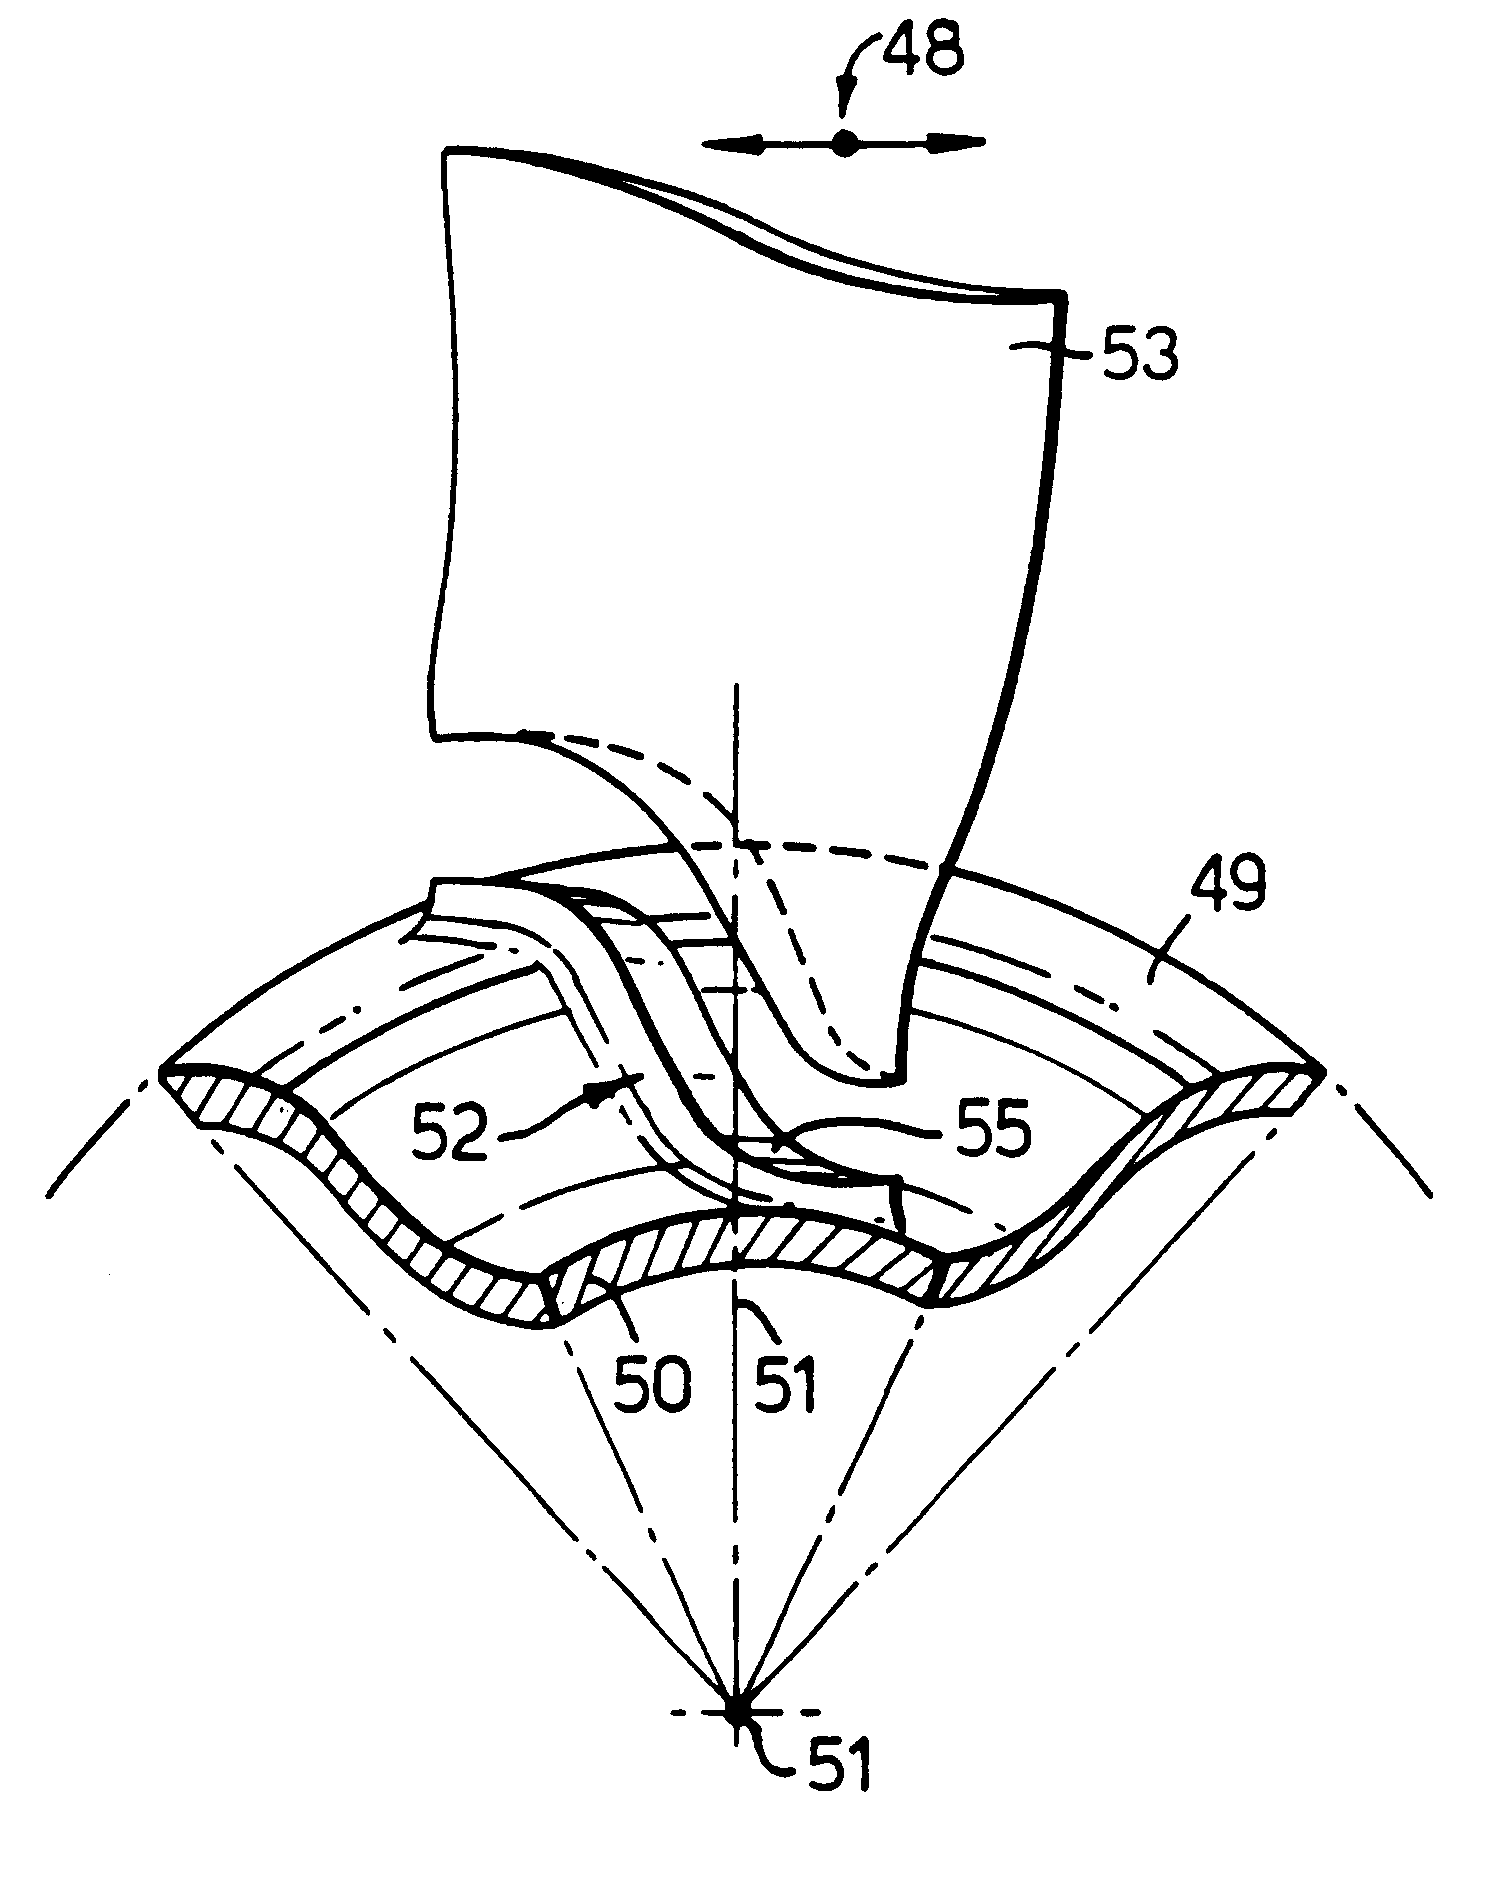 Disk for a blisk rotary stage of a gas turbine engine